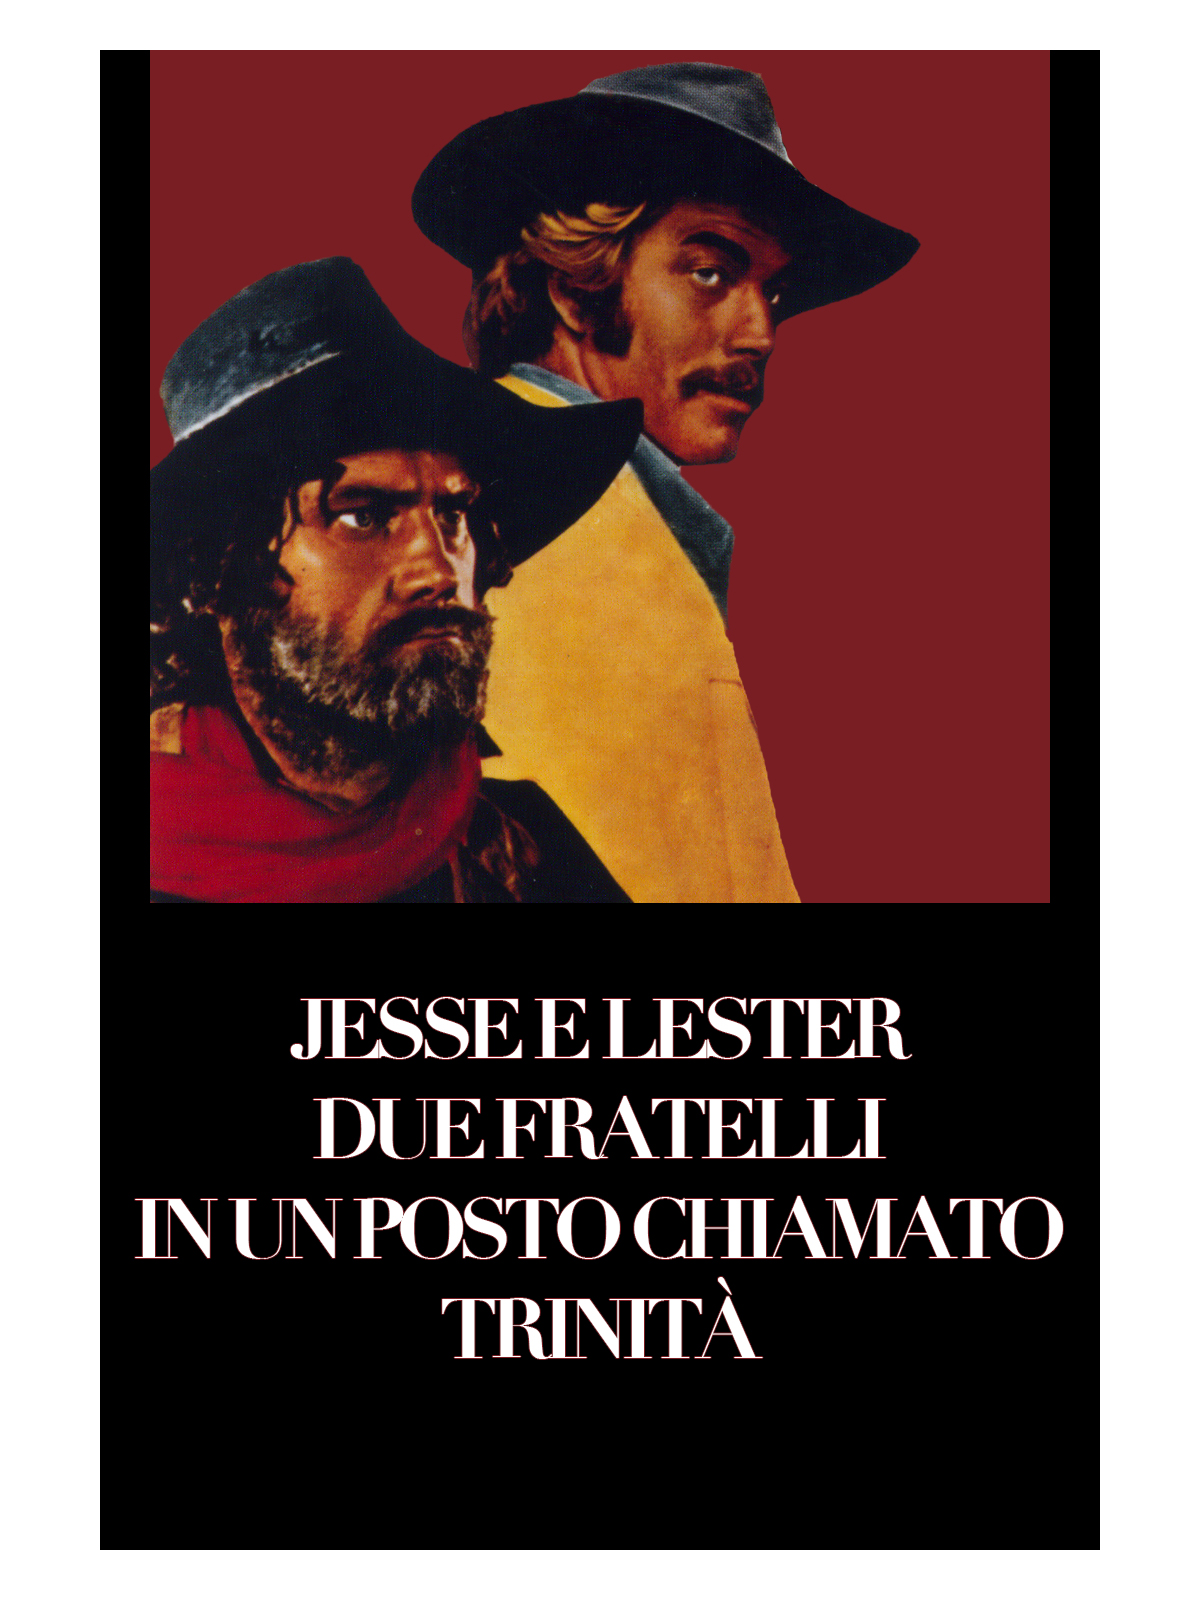 Jesse and Lester, Two Brothers in a Place Called Trinity